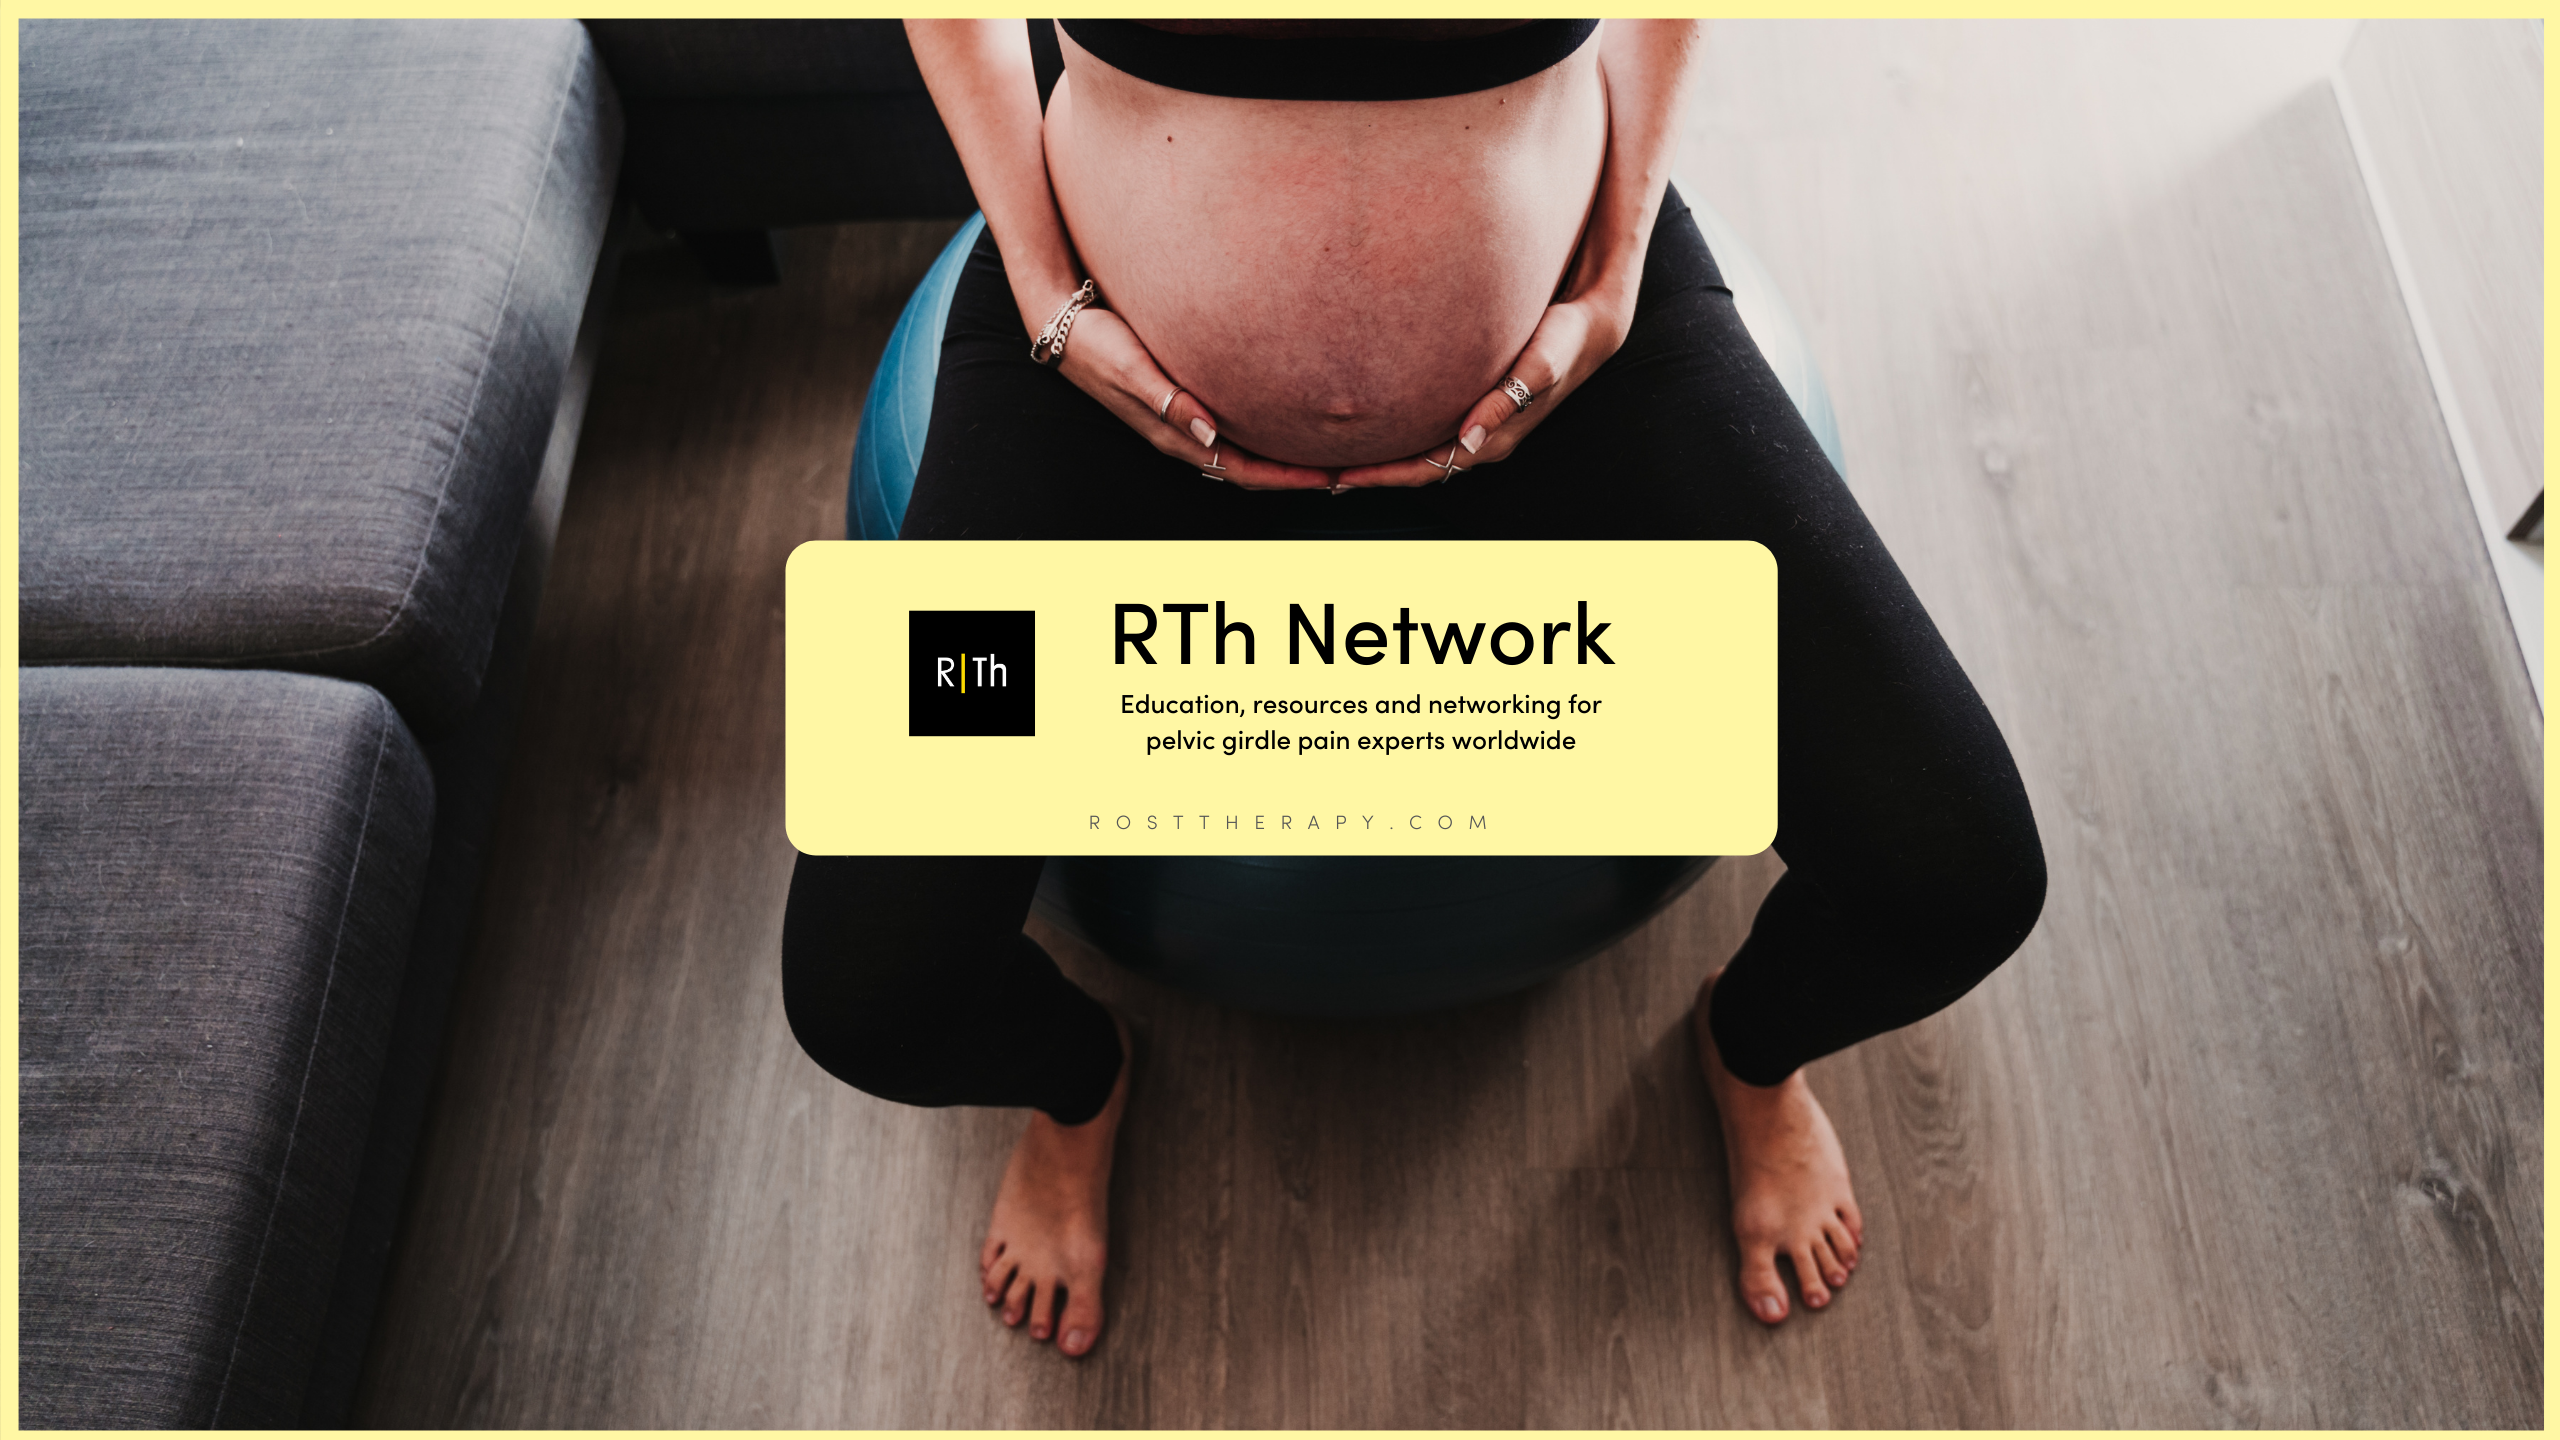 RTh Network - Connecting +700 PGP & Coccydynia Professionals